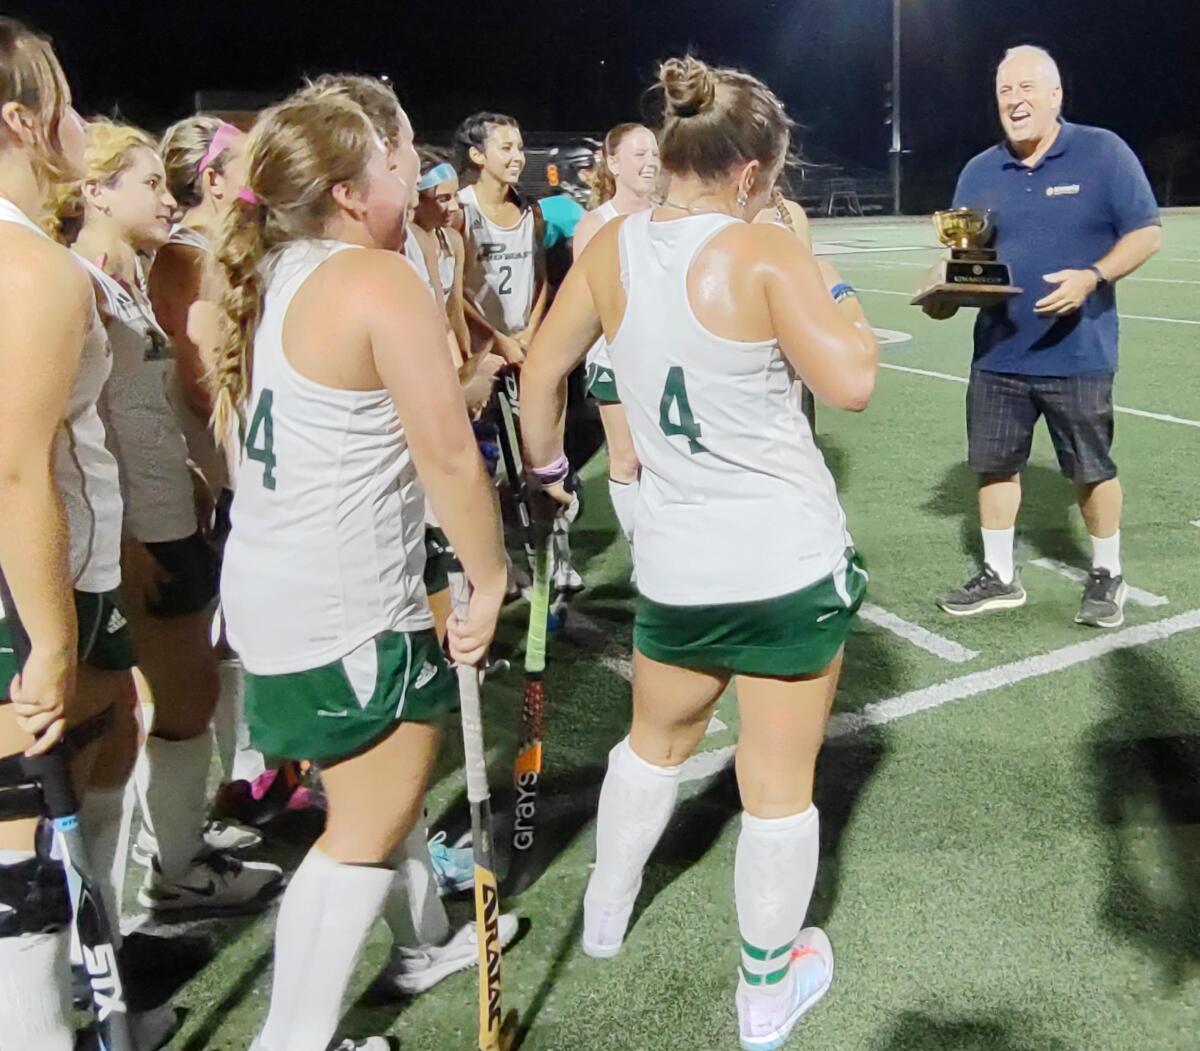 Kiwanis Club of Poway Foundation president John Couvrette delivers the inaugural Kiwanis Cup to the Titans field hockey team.